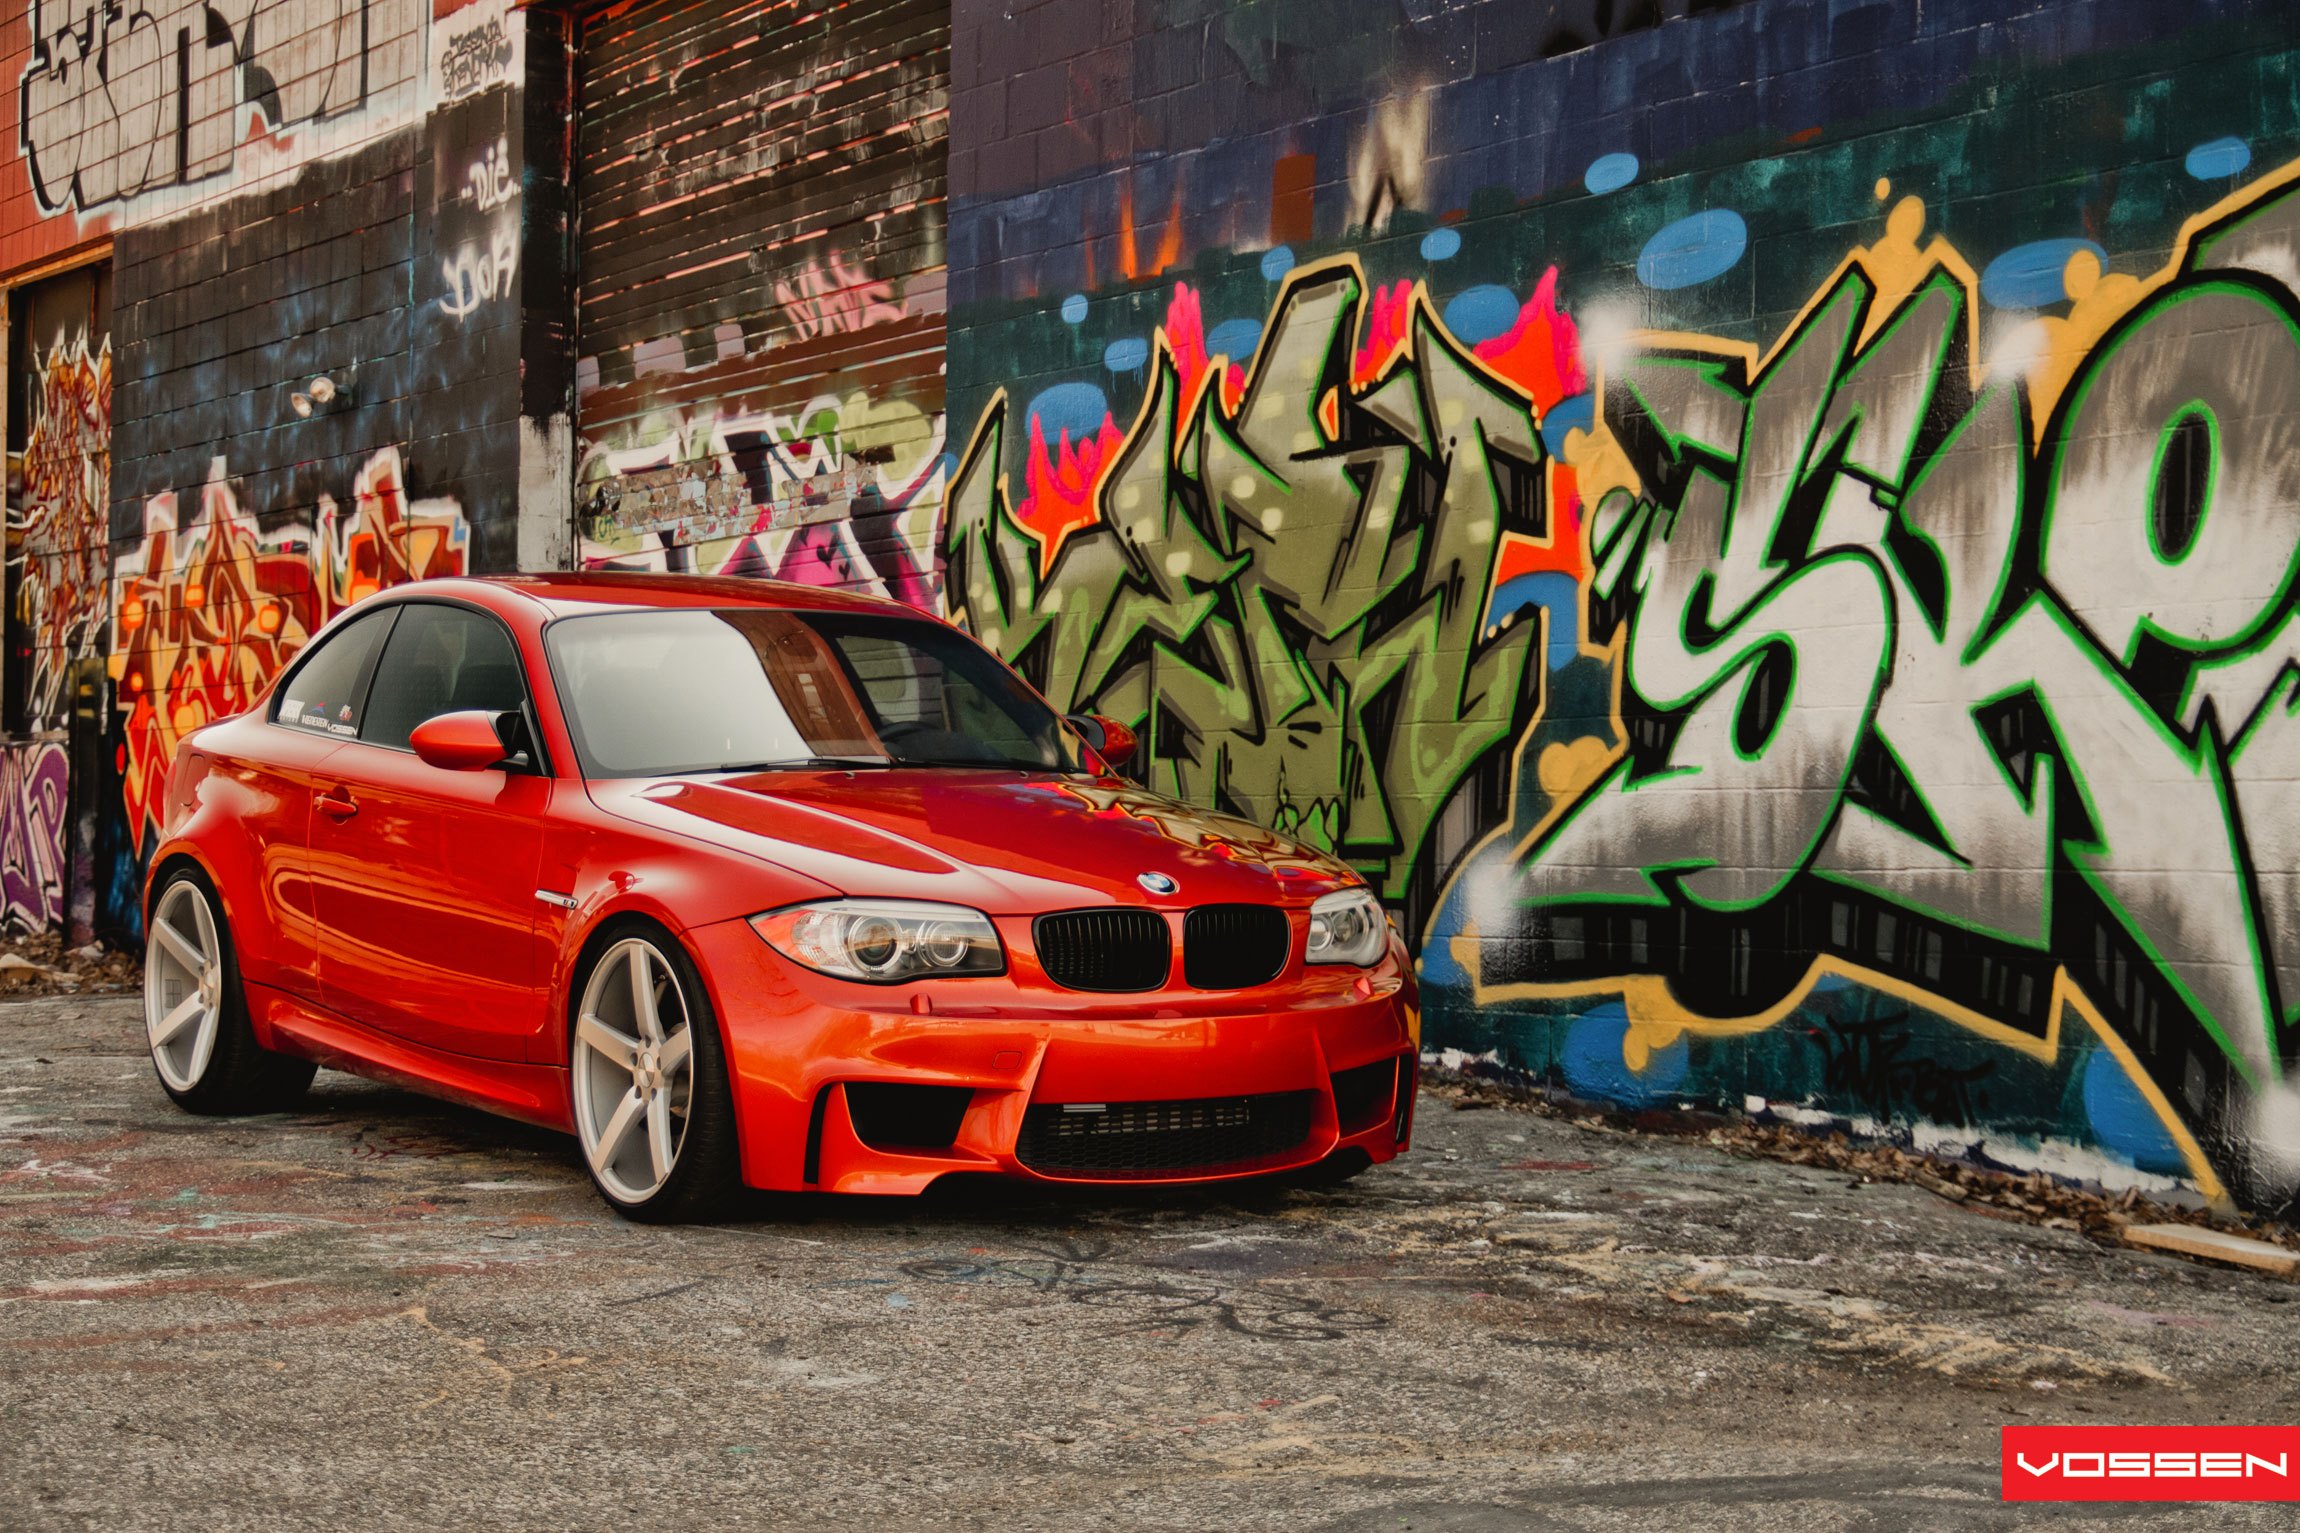 Red BMW 1-Series with Custom Body Kit - Photo by Vossen